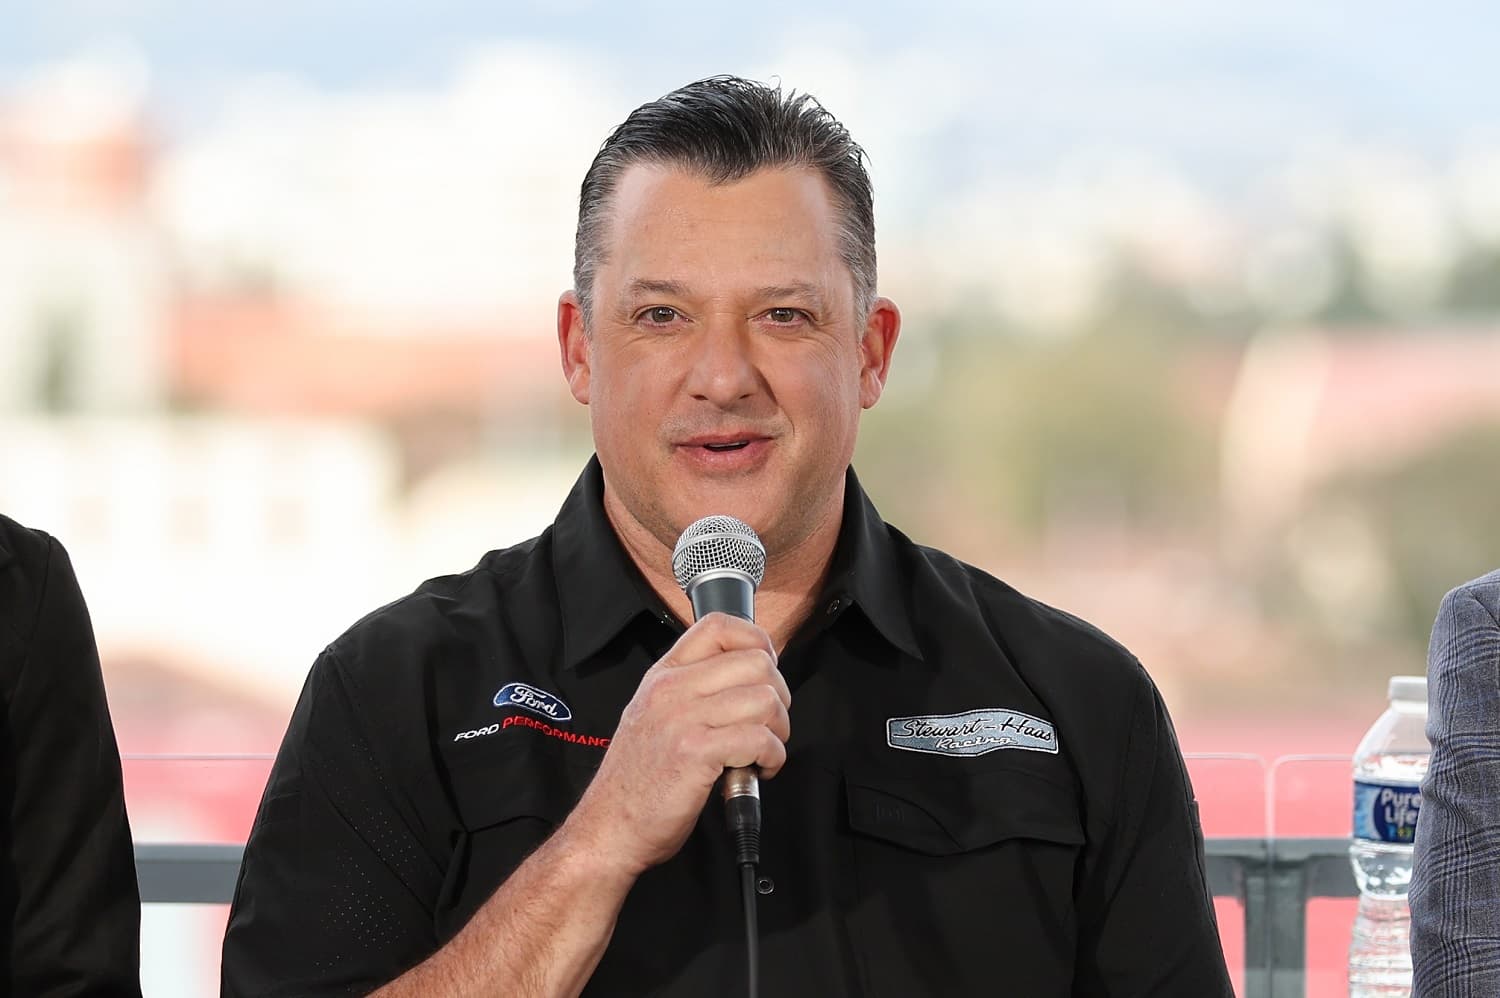 NASCAR Hall of Famer and broadcaster Tony Stewart attends the Fox Sports NASCAR press conference at Los Angeles Coliseum on Feb. 3, 2023. | James Gilbert/Getty Images